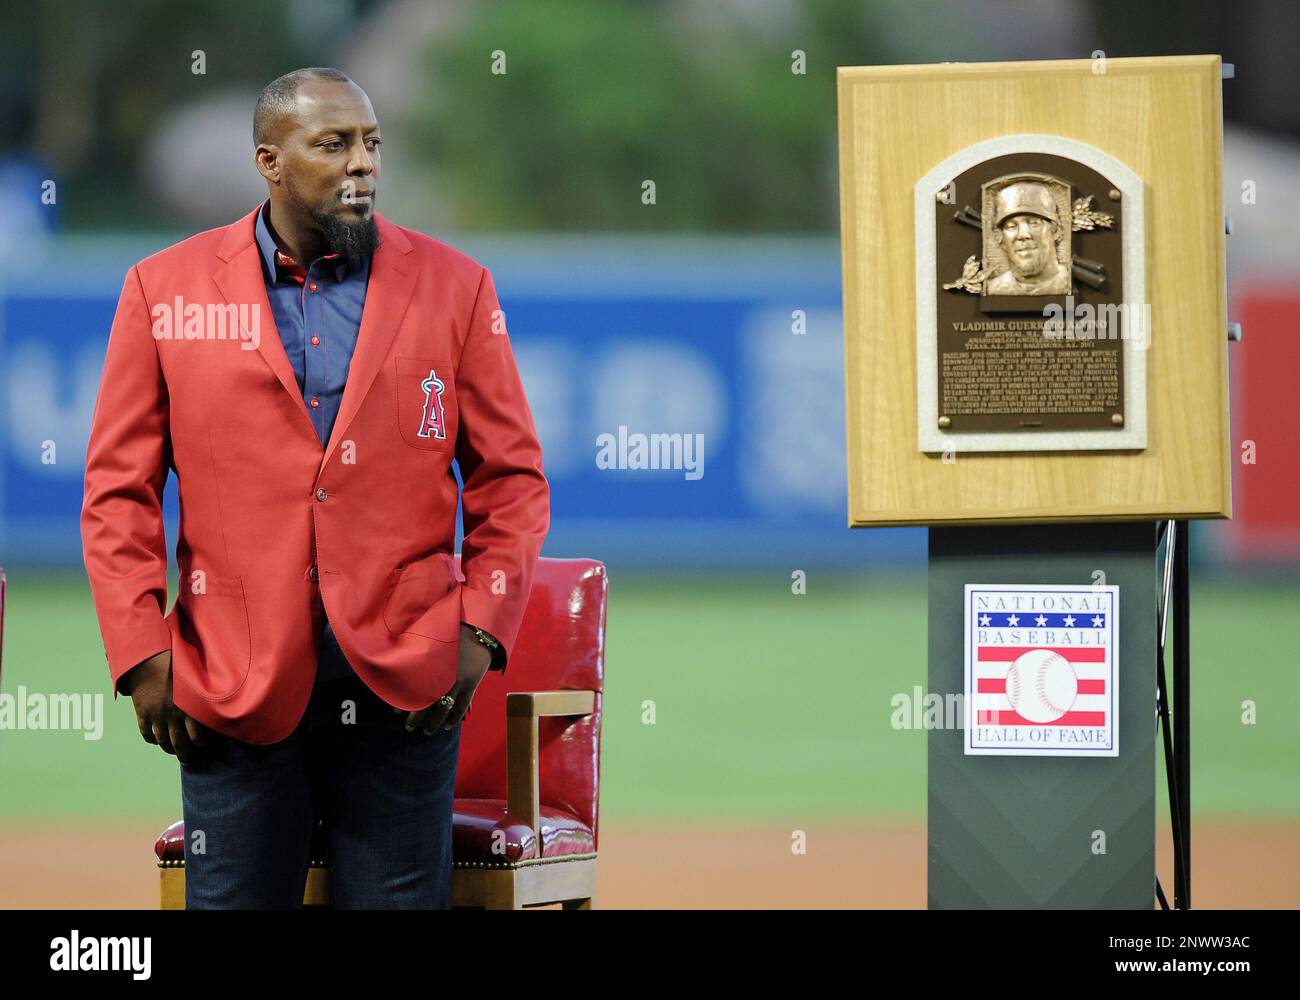 ANAHEIM, CA - AUGUST 10: Former Los Angeles Angels outfielder Vladimir  Guerrero on the field next to his Baseball Hall of Fame plaque as Guerrero  is honored for becoming the first player